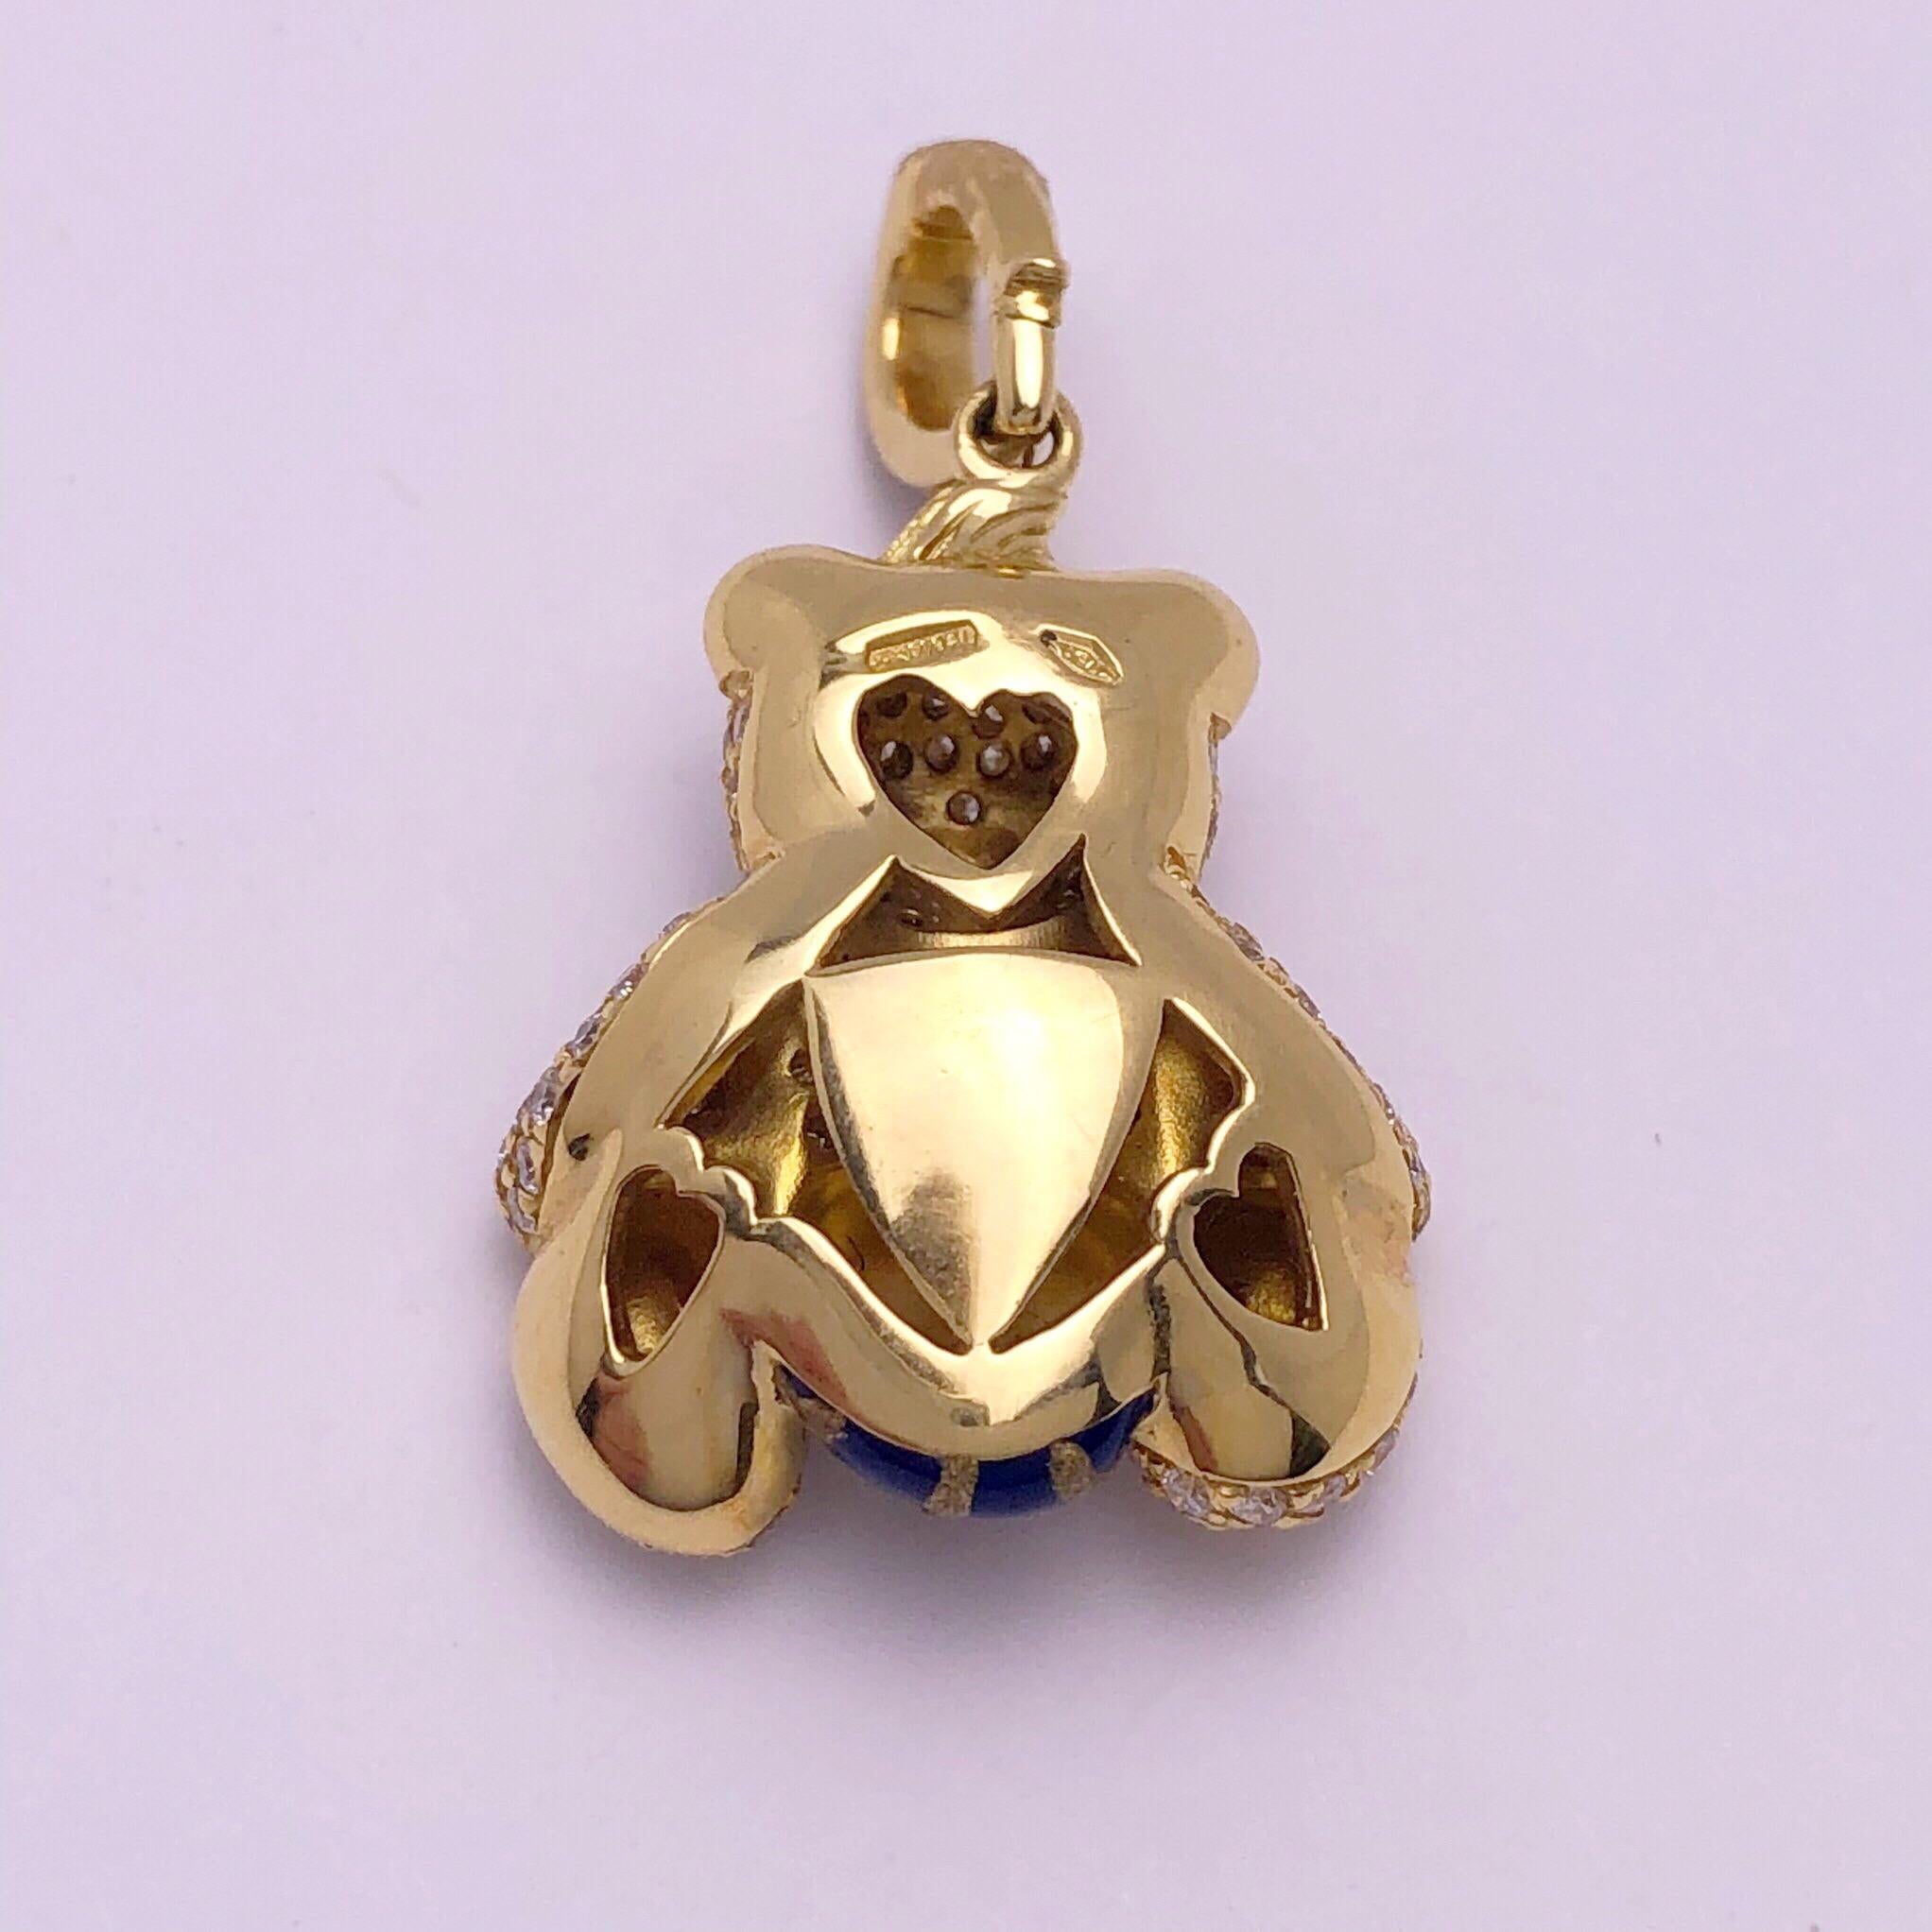 Just the cutest....Teddy bear charm made exclusively for Cellini by Ambrosi of Italy.
This 18 karat yellow gold teddy bear is fully set with 1.07 carats of round brilliant diamonds, including the diamond bale. He has blue sapphire eyes and his